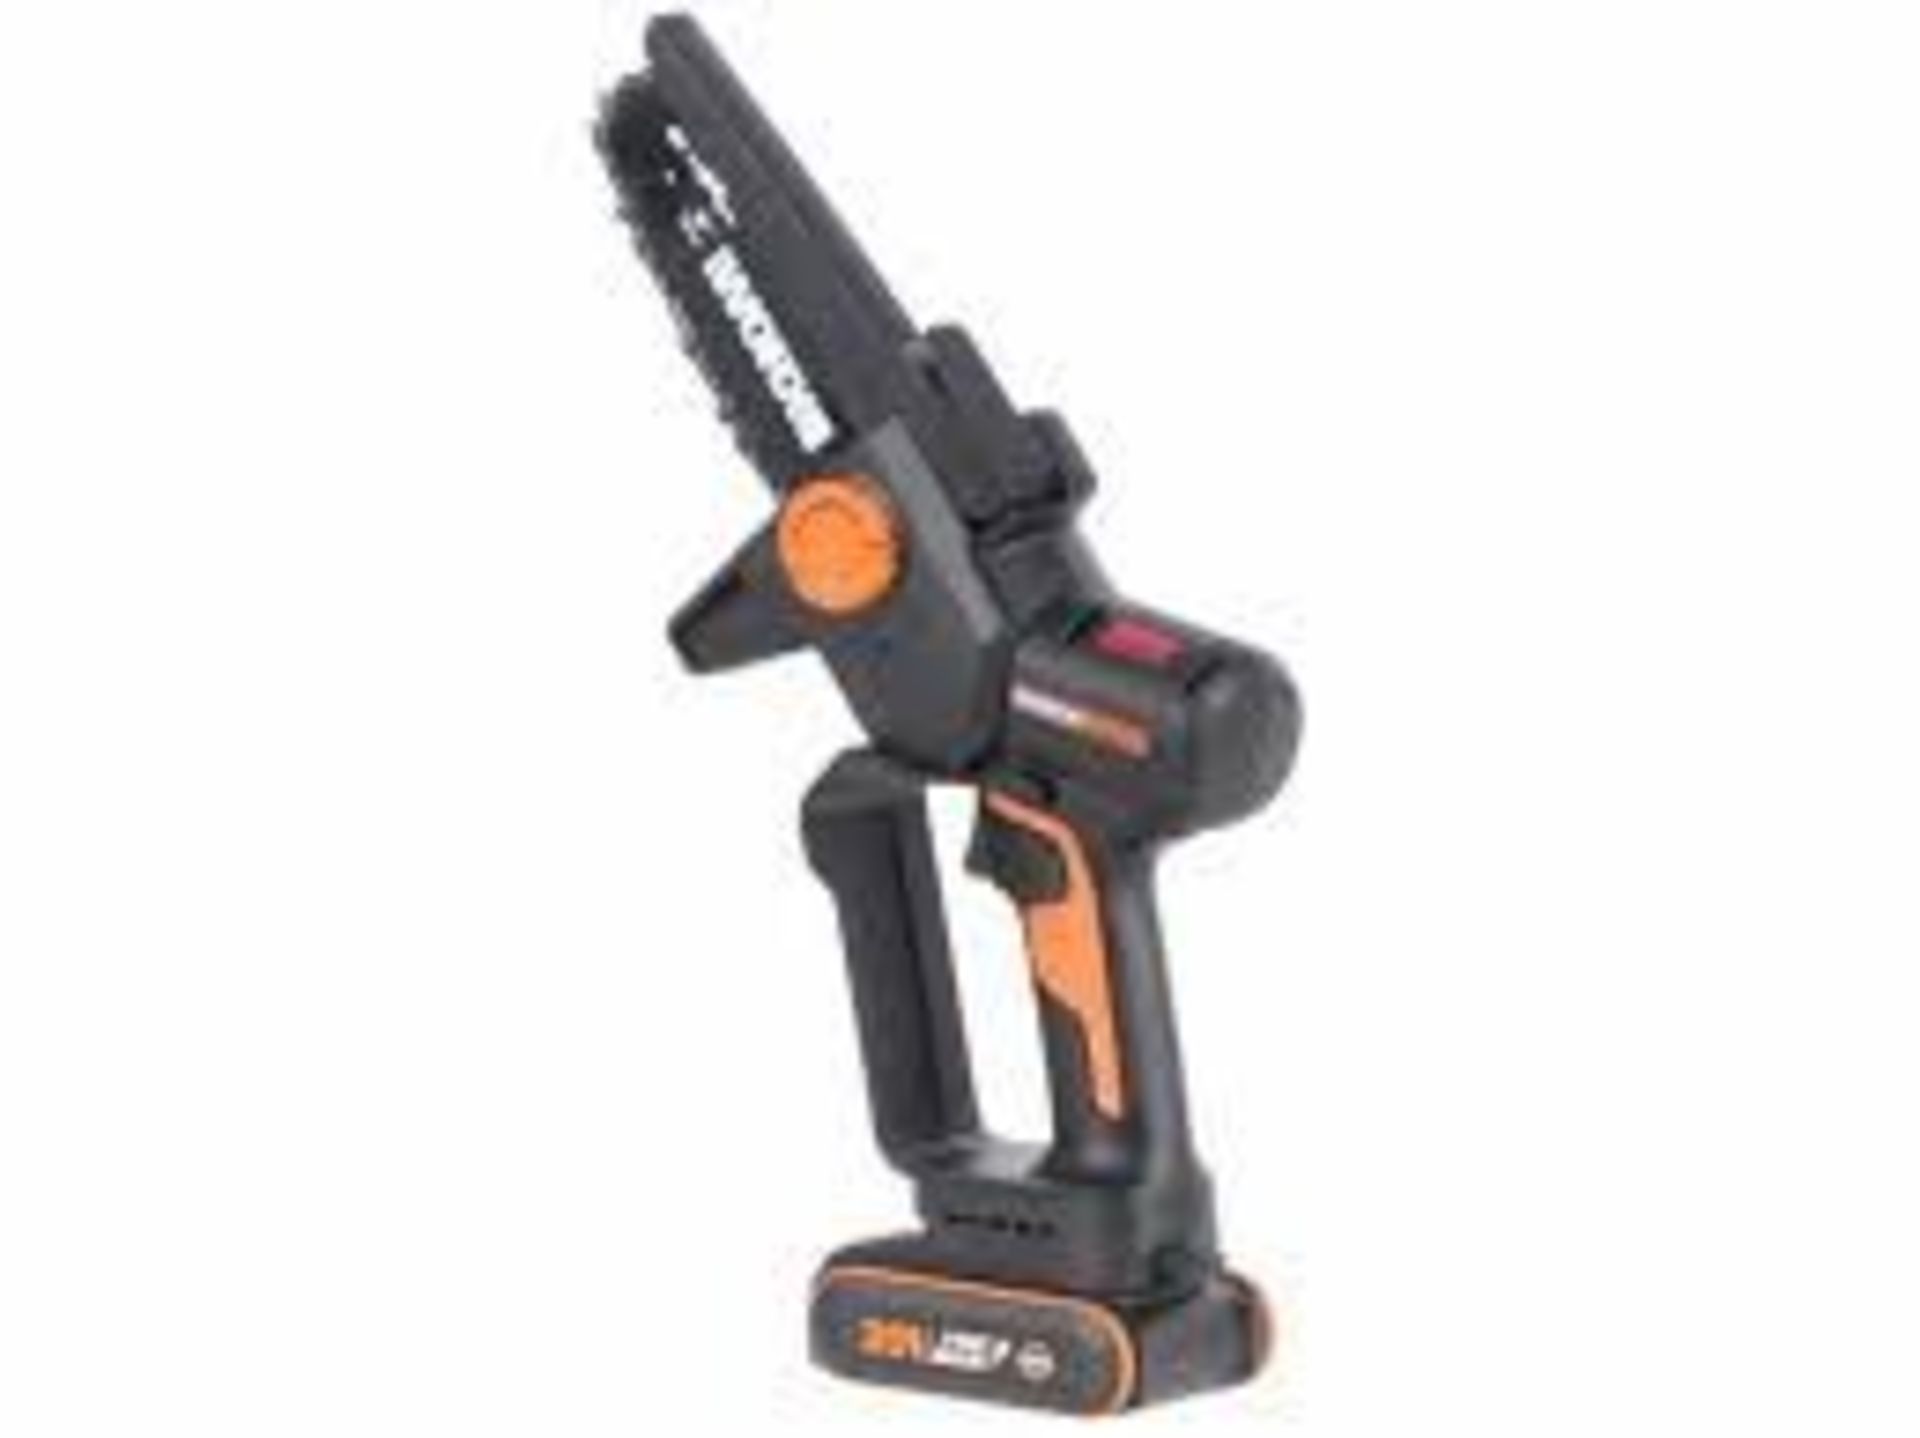 Worx Nitro WG325E Battery-Powered Manual Pruner. - PW.Versatile, compact saw suitable for pruning,